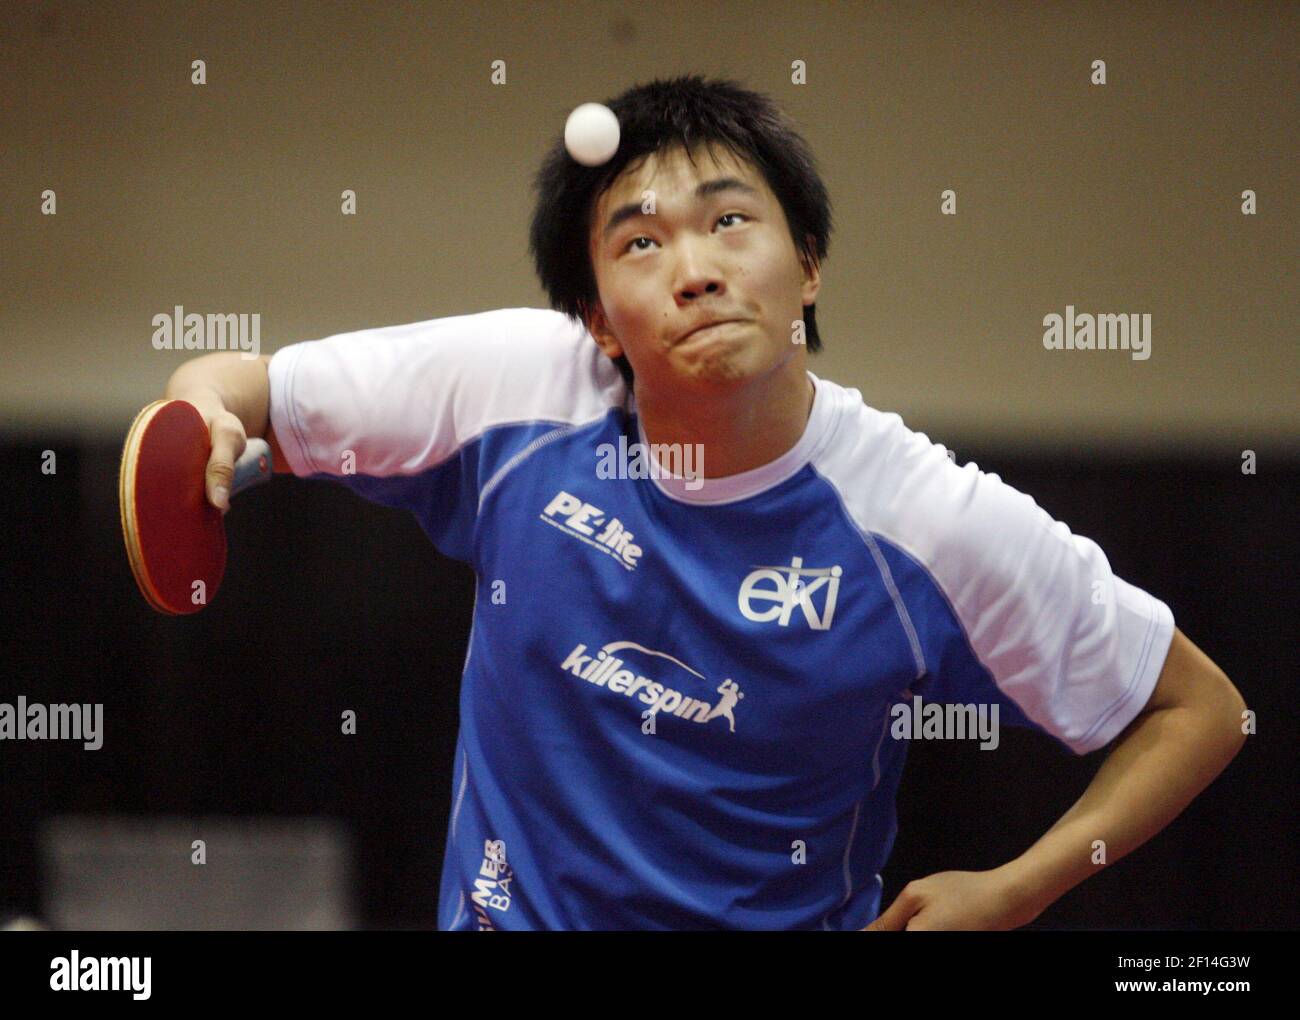 Adam Hugh returns a volley to Yu Shao during the Men's U.S. Olympic Table  Tennis Trials at the Daskalakas Center in Philadelphia, Pennsylvania,  Sunday, January 13, 2008. (Photo by Charles Fox/Philadelphia  Inquirer/MCT/Sipa